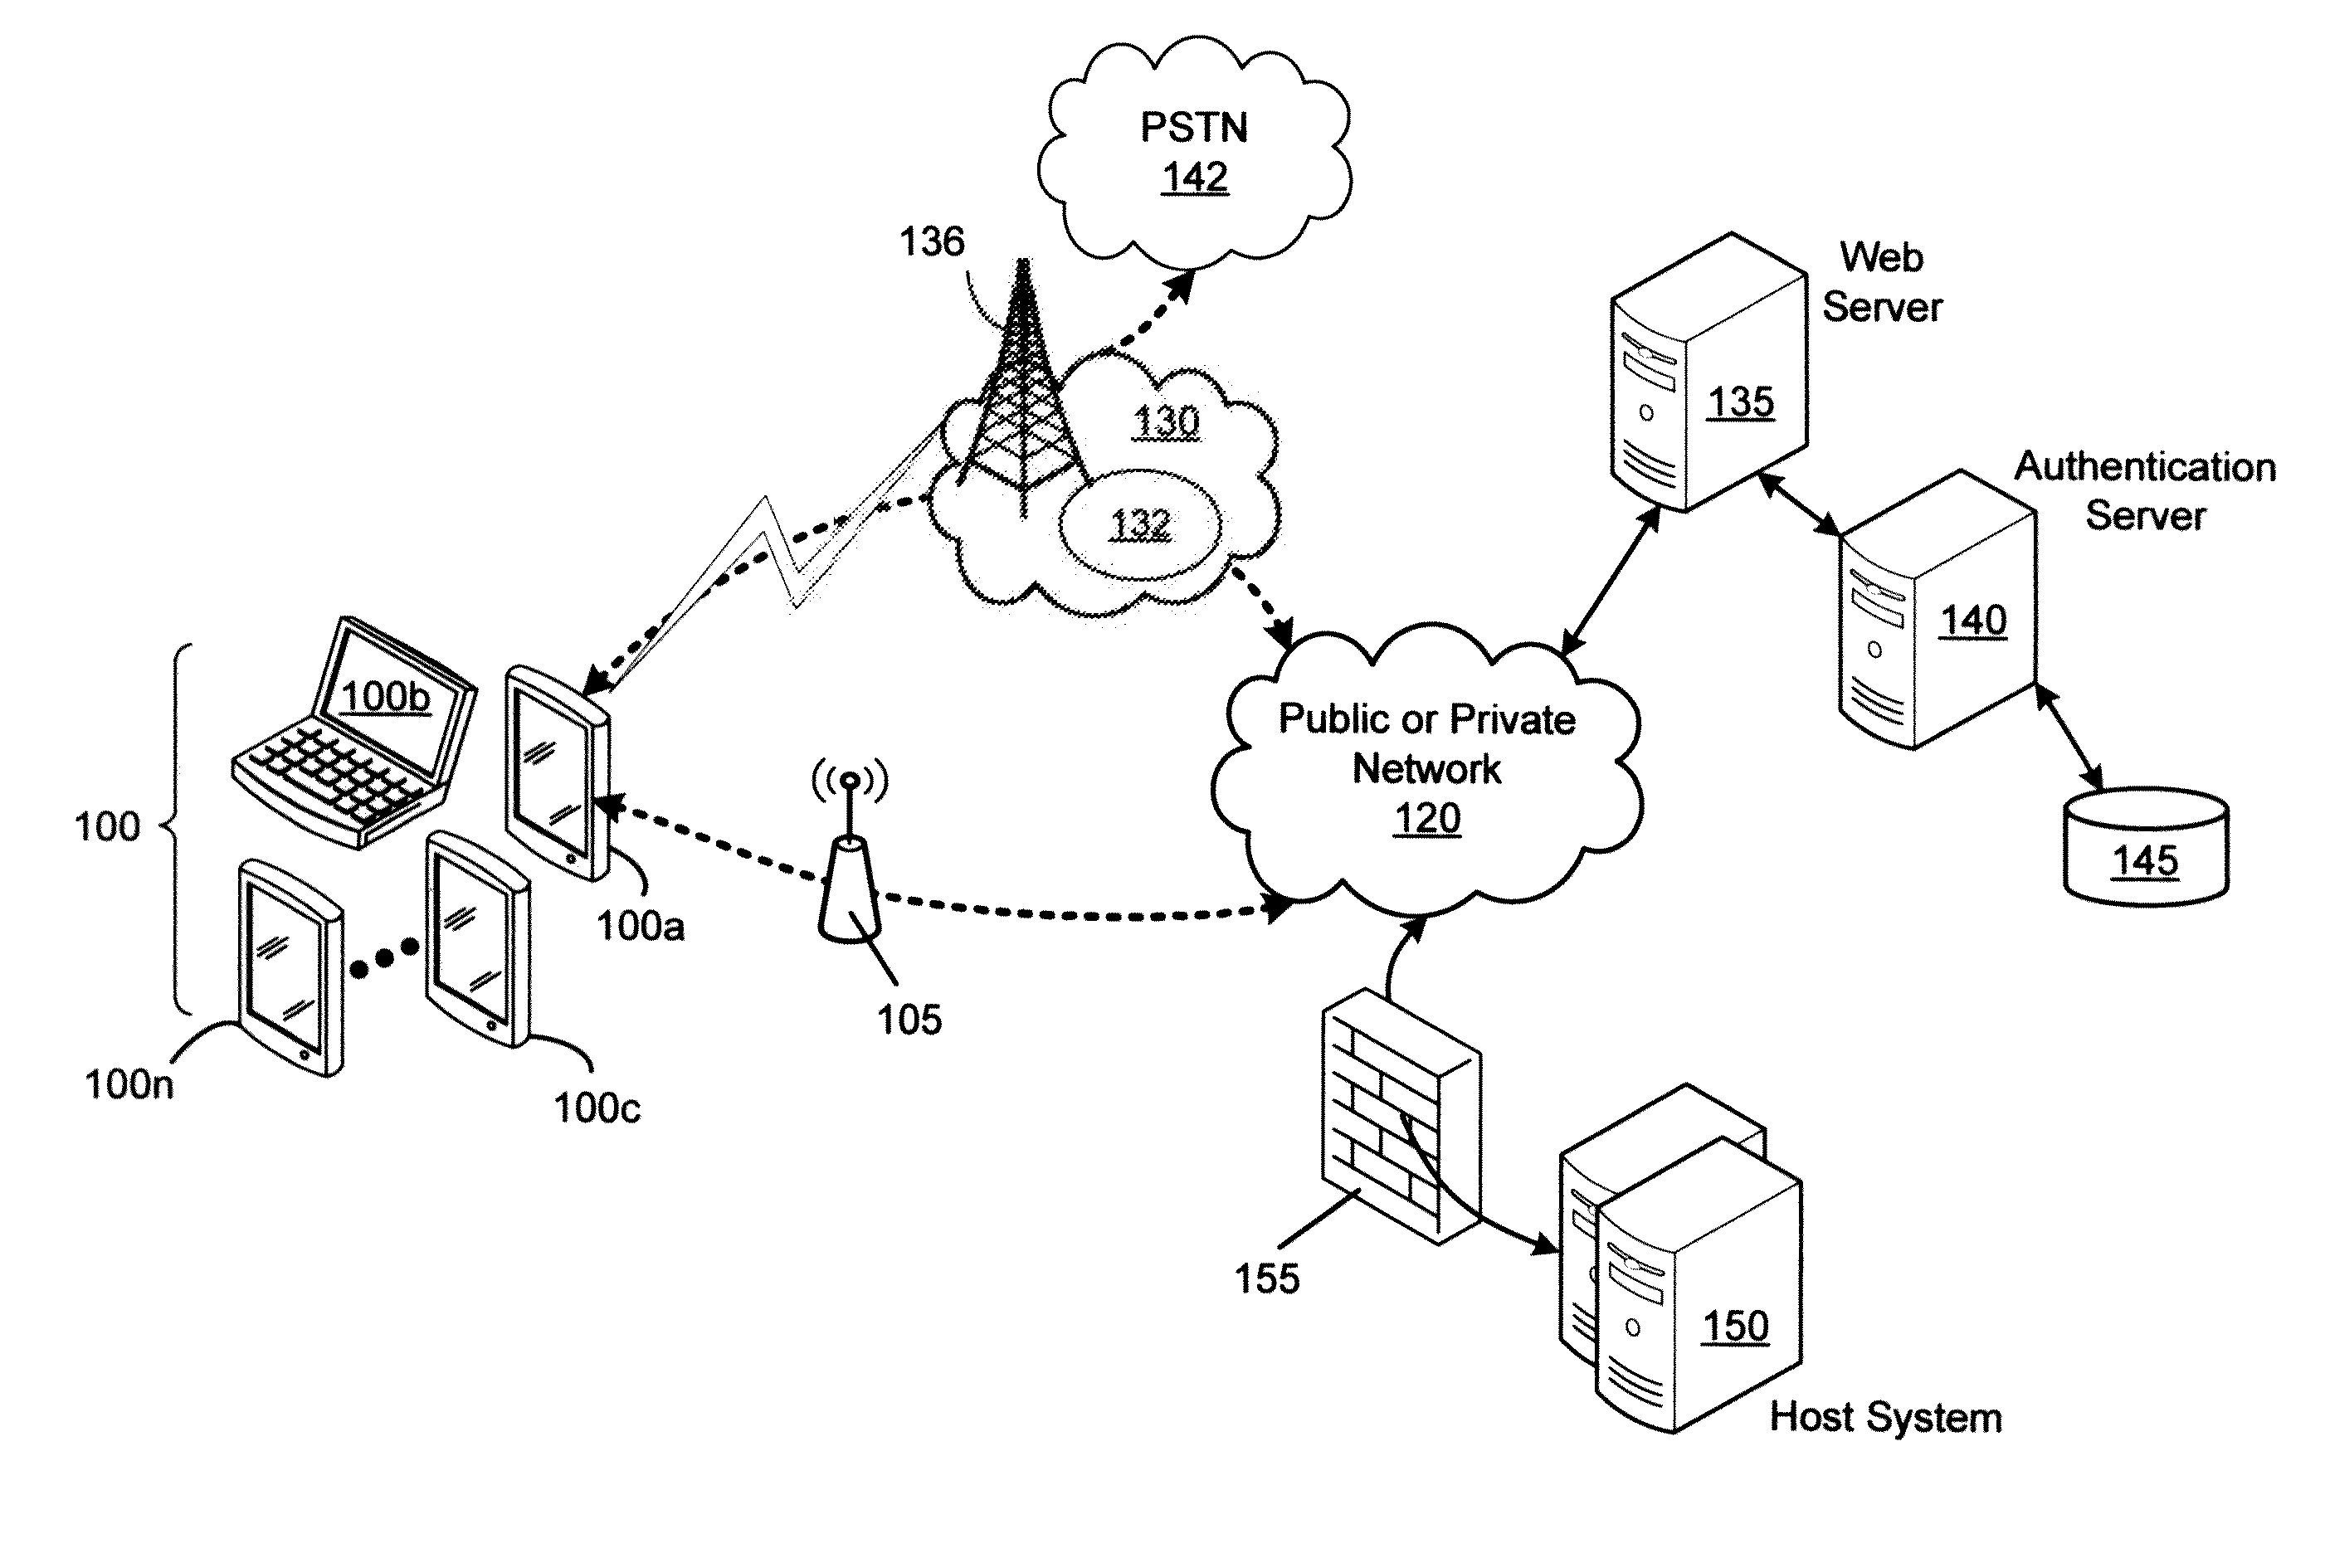 Mitigation of application-level distributed denial-of-service attacks